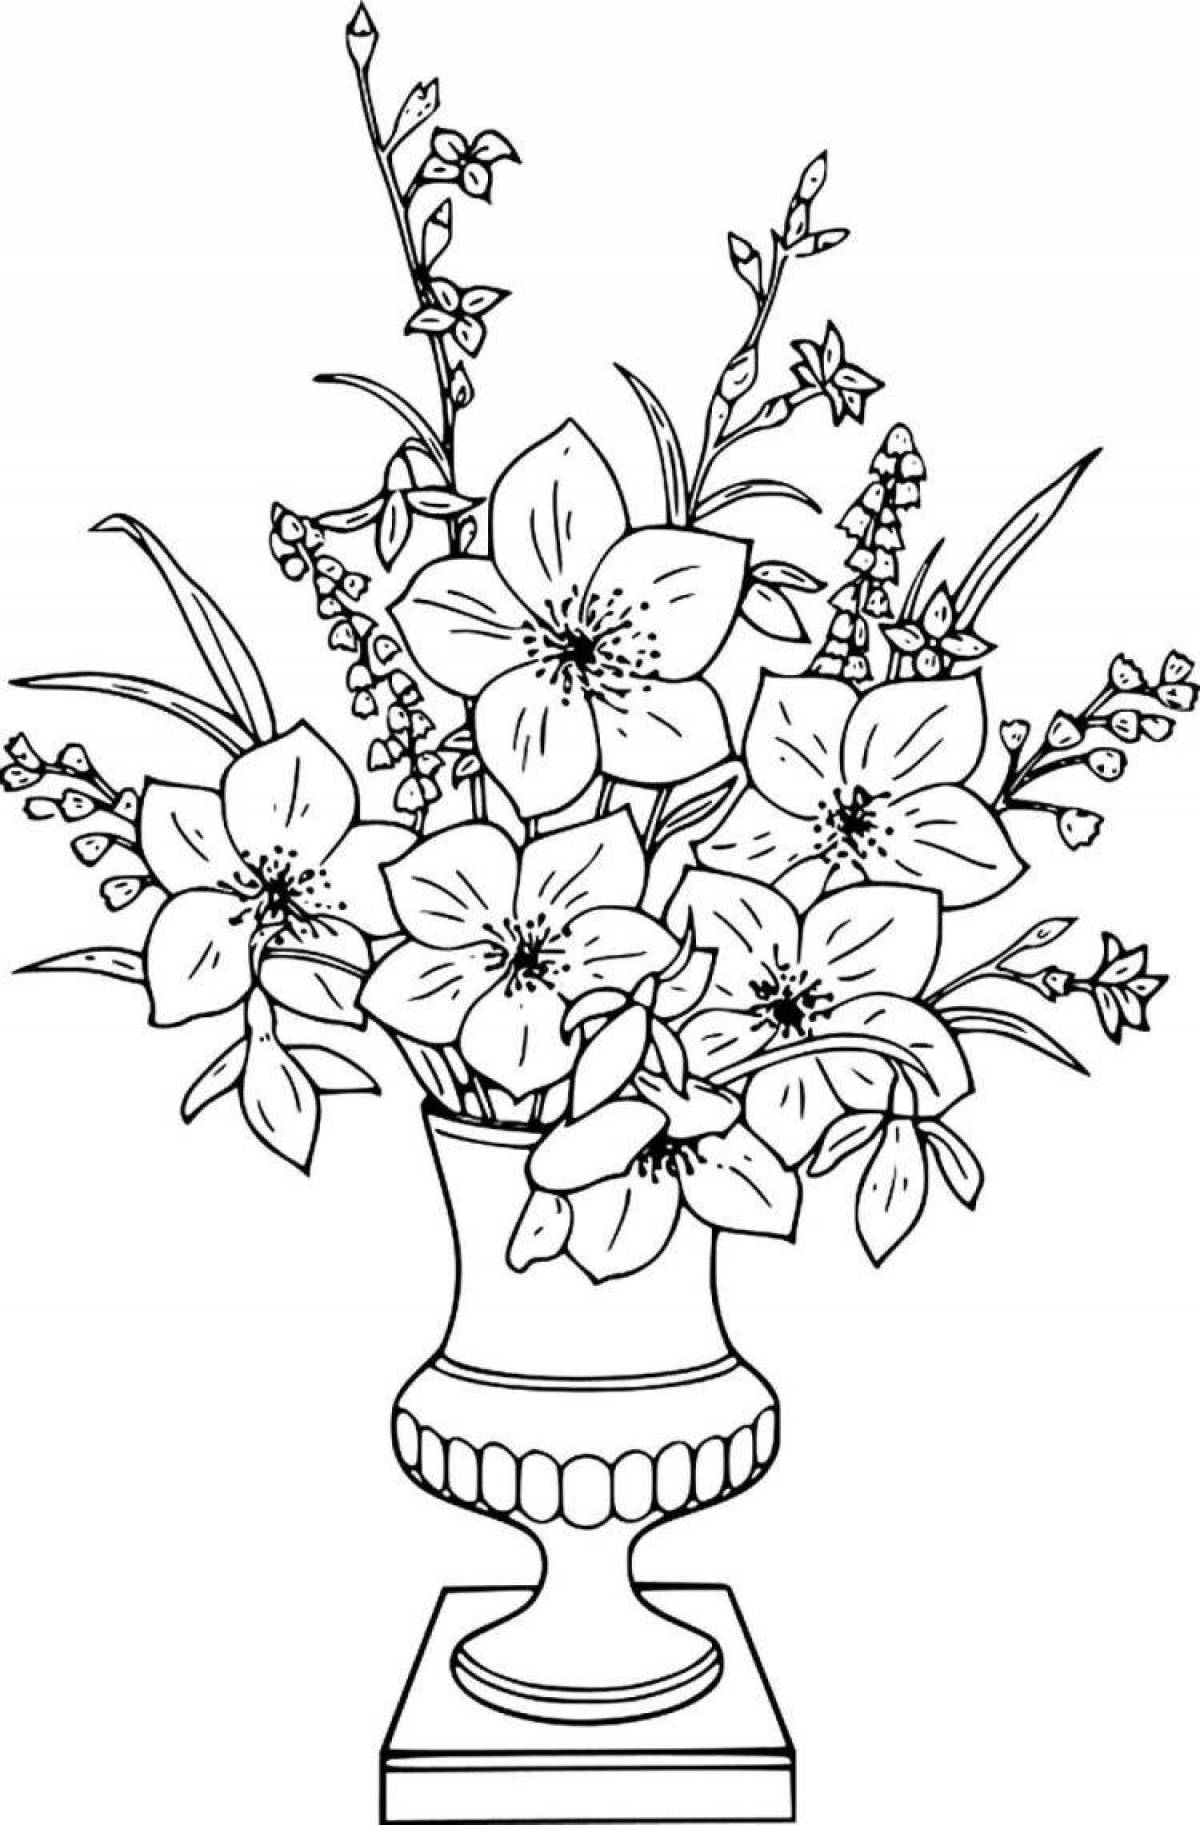 Coloring big playful flowers in a vase